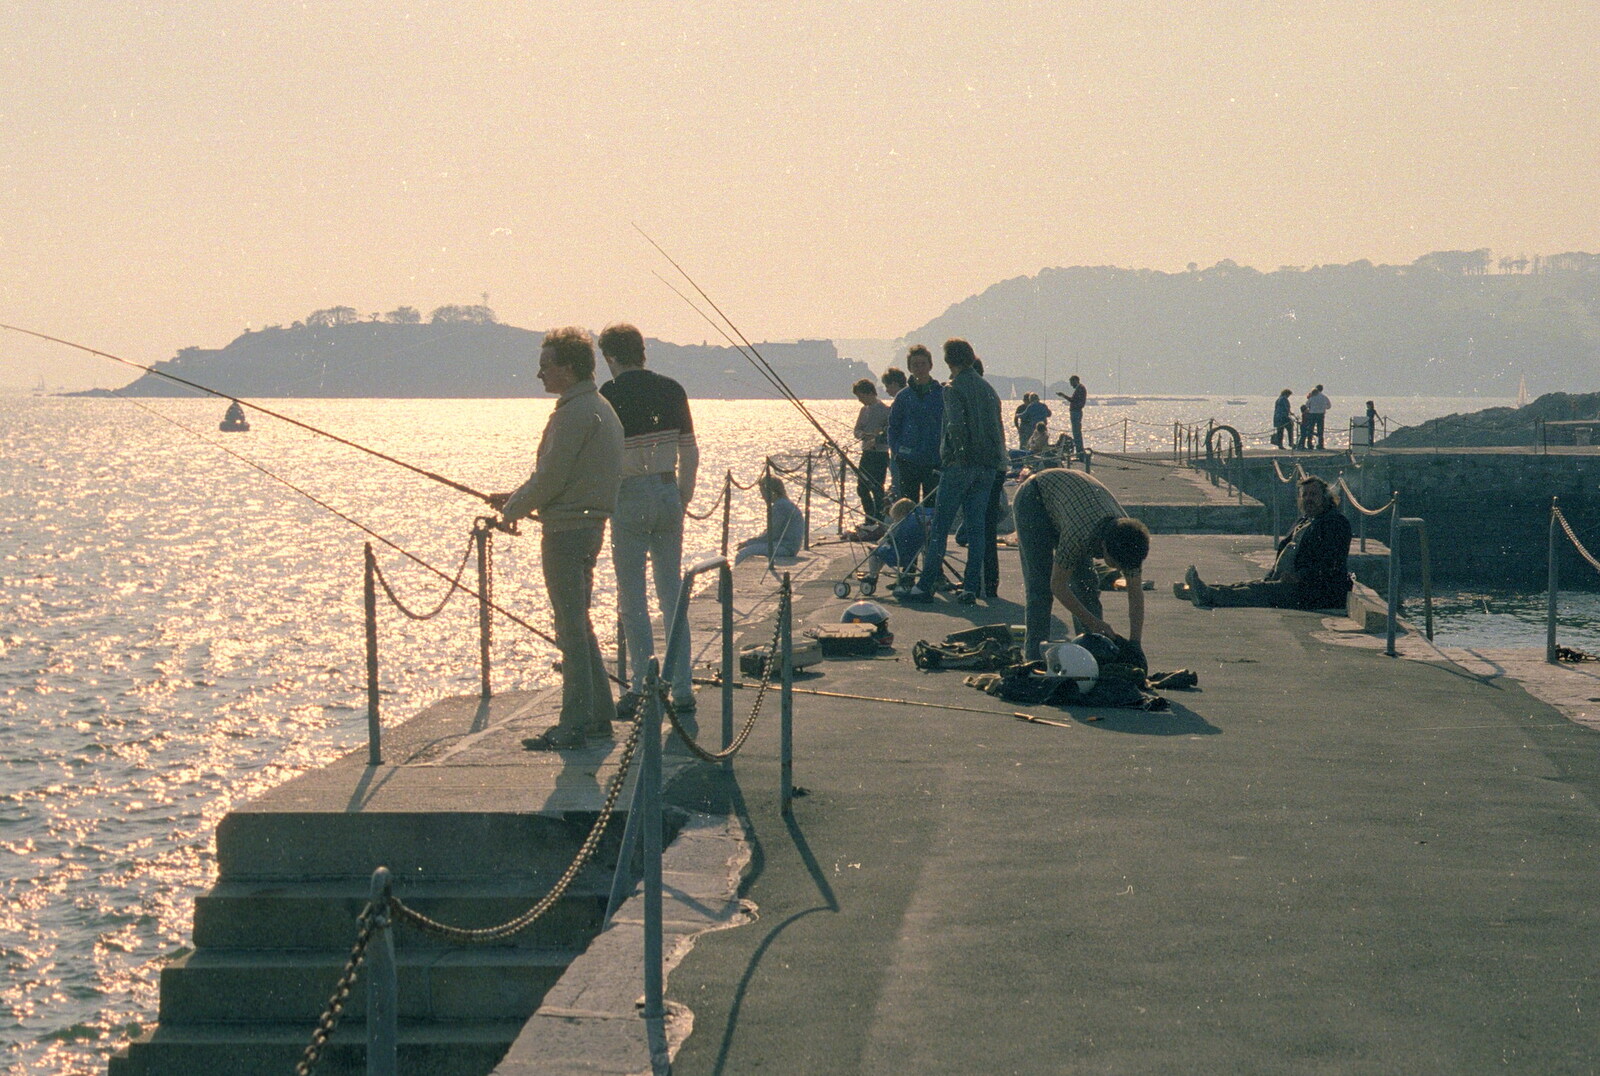 Fishing action on West Hoe from Uni: First Weeks At Polytechnic, Umbrellas and a Visit From Liz, Plymouth - 26th September 1985